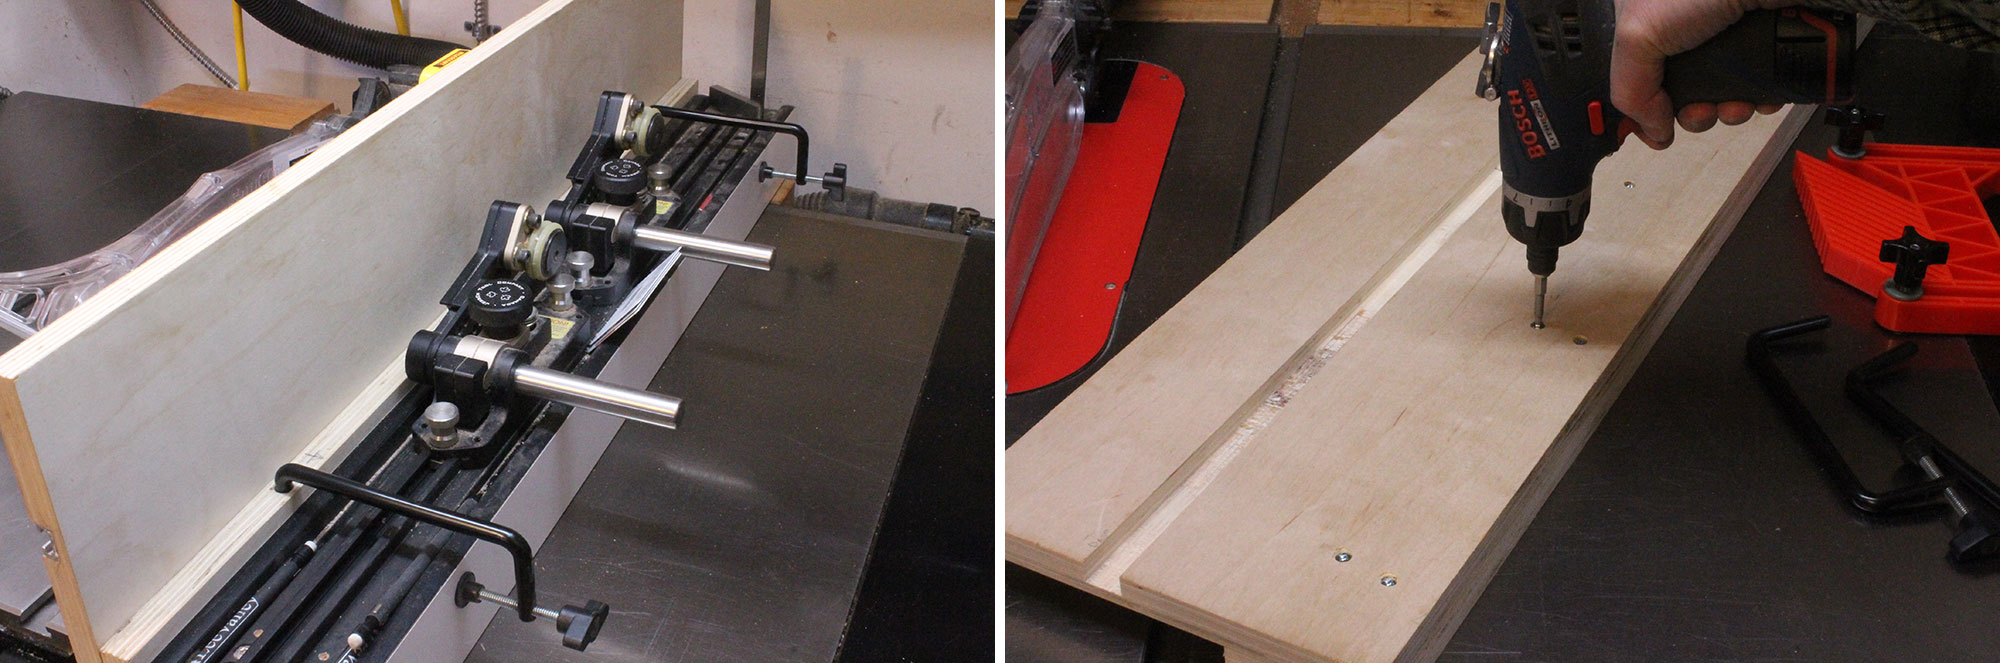 Image left: Fence clamp on table saw. Image right: Drilling into plywood.